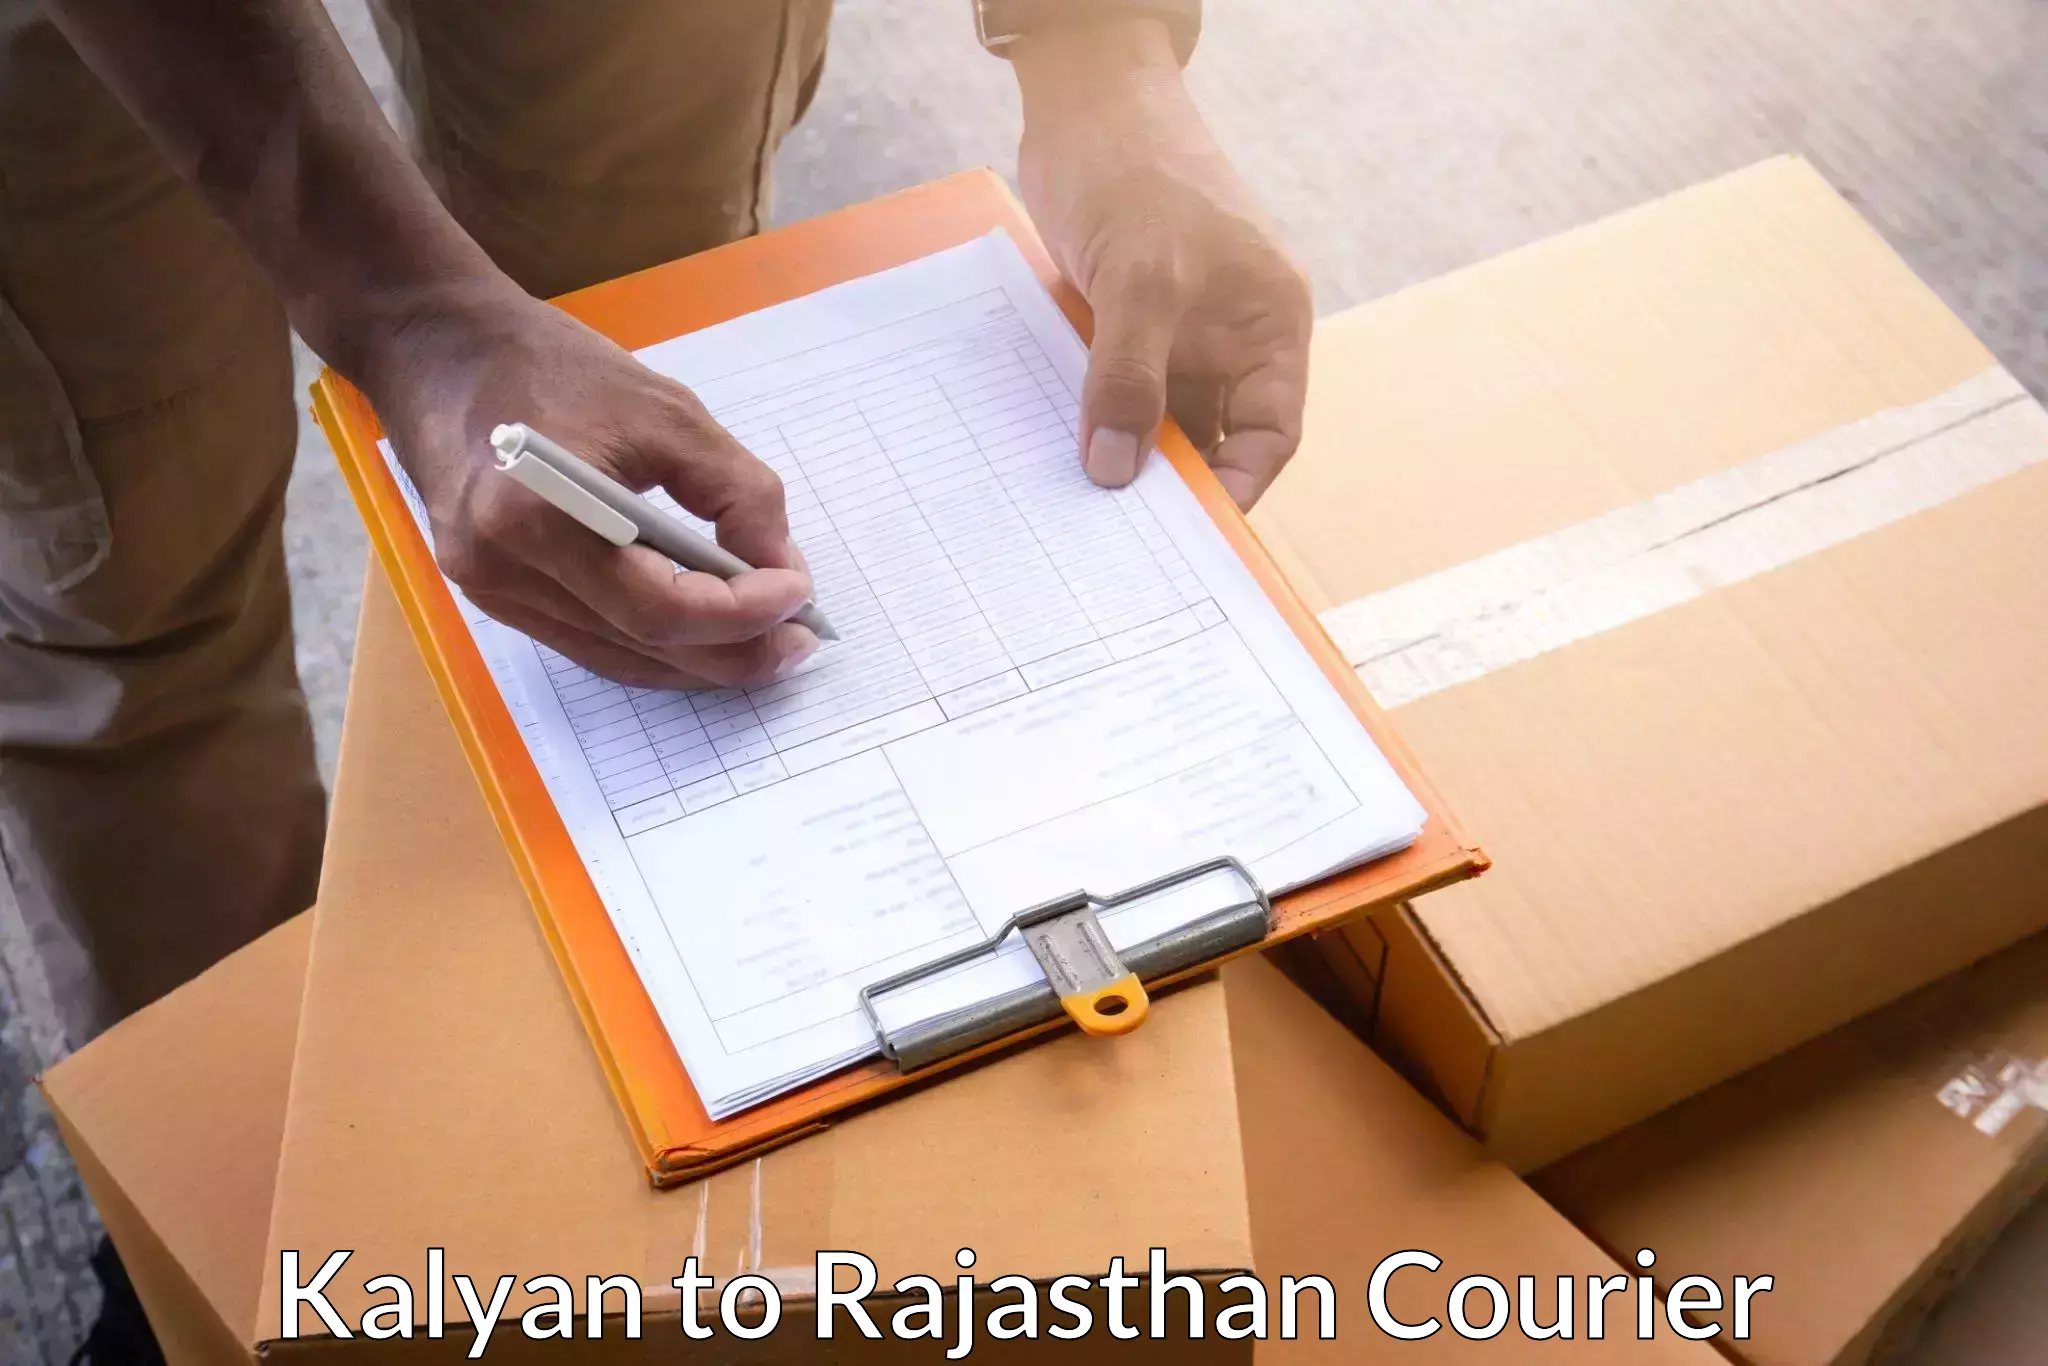 Subscription-based courier Kalyan to Dholpur